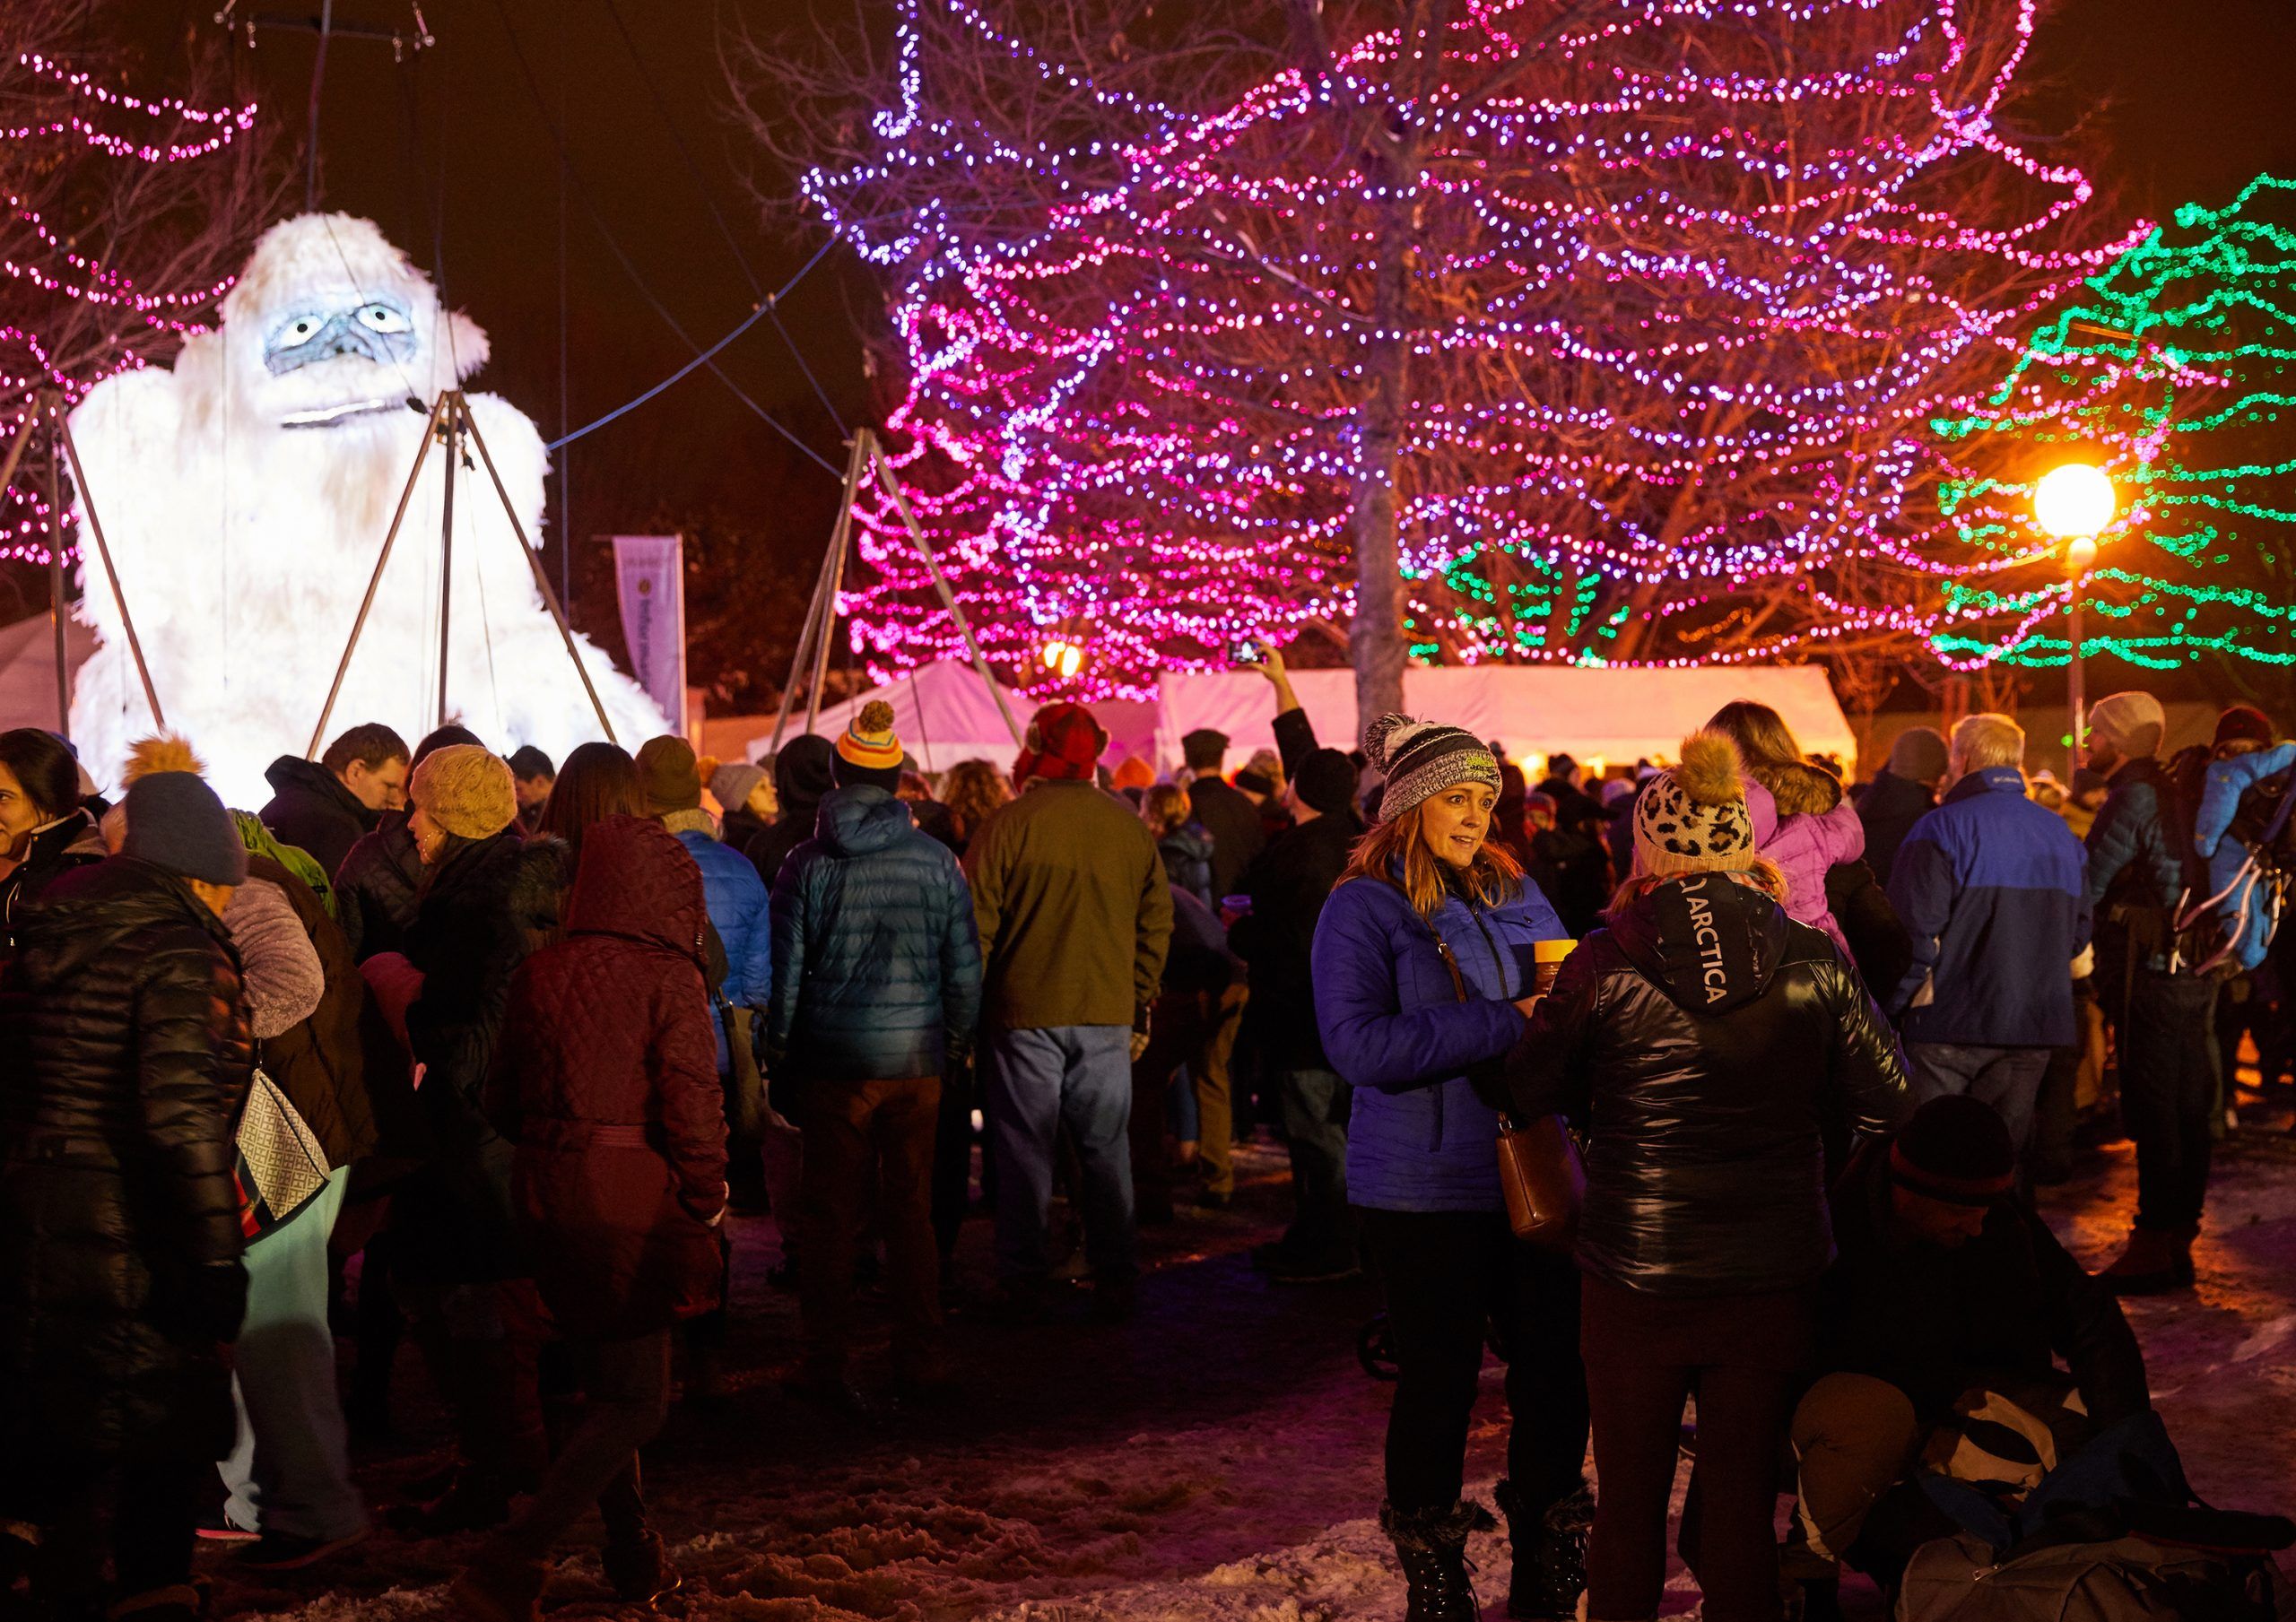 People gather at a holiday light festival